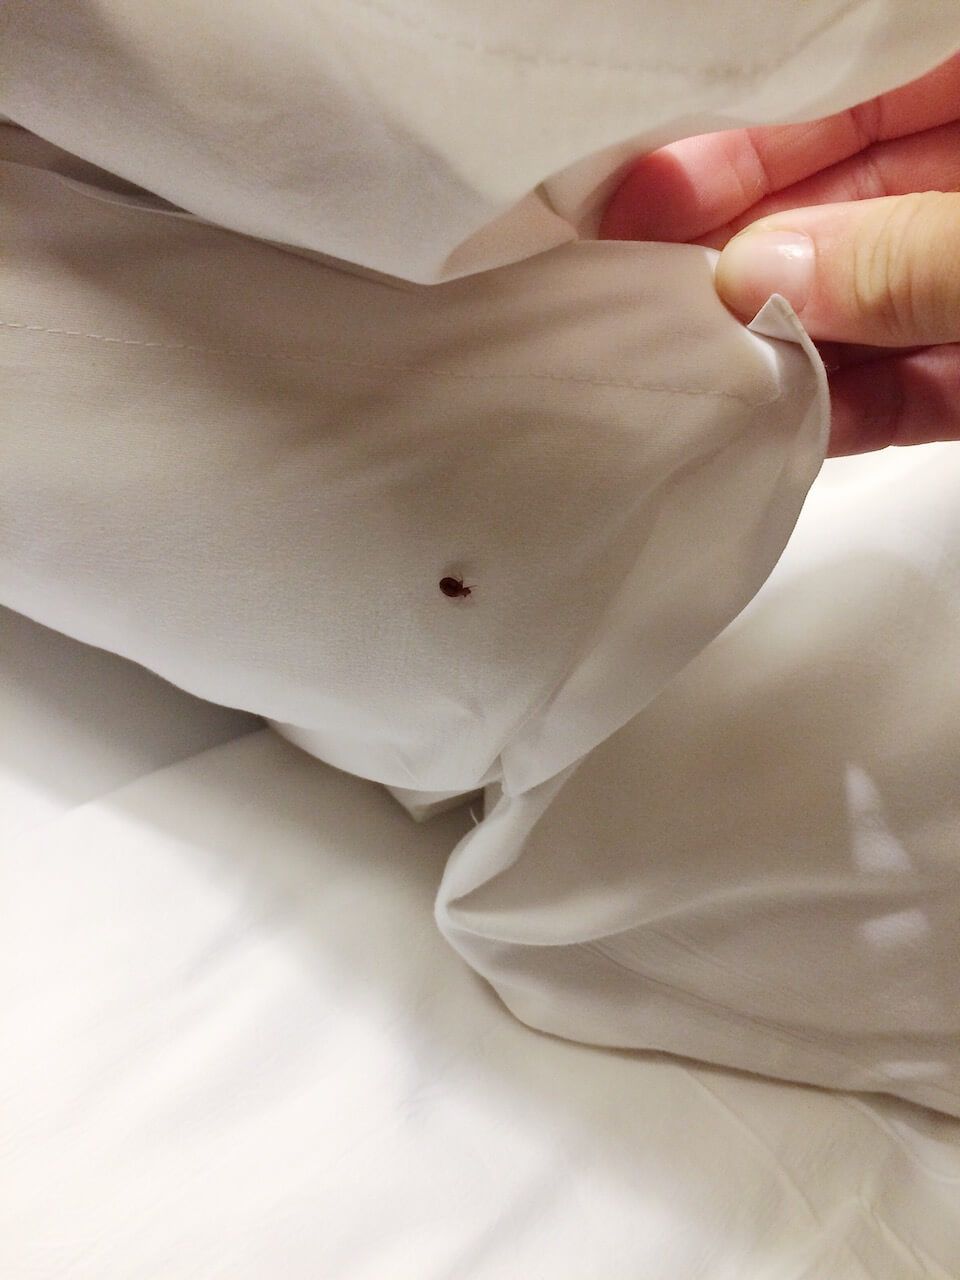 Bed bug in bed.